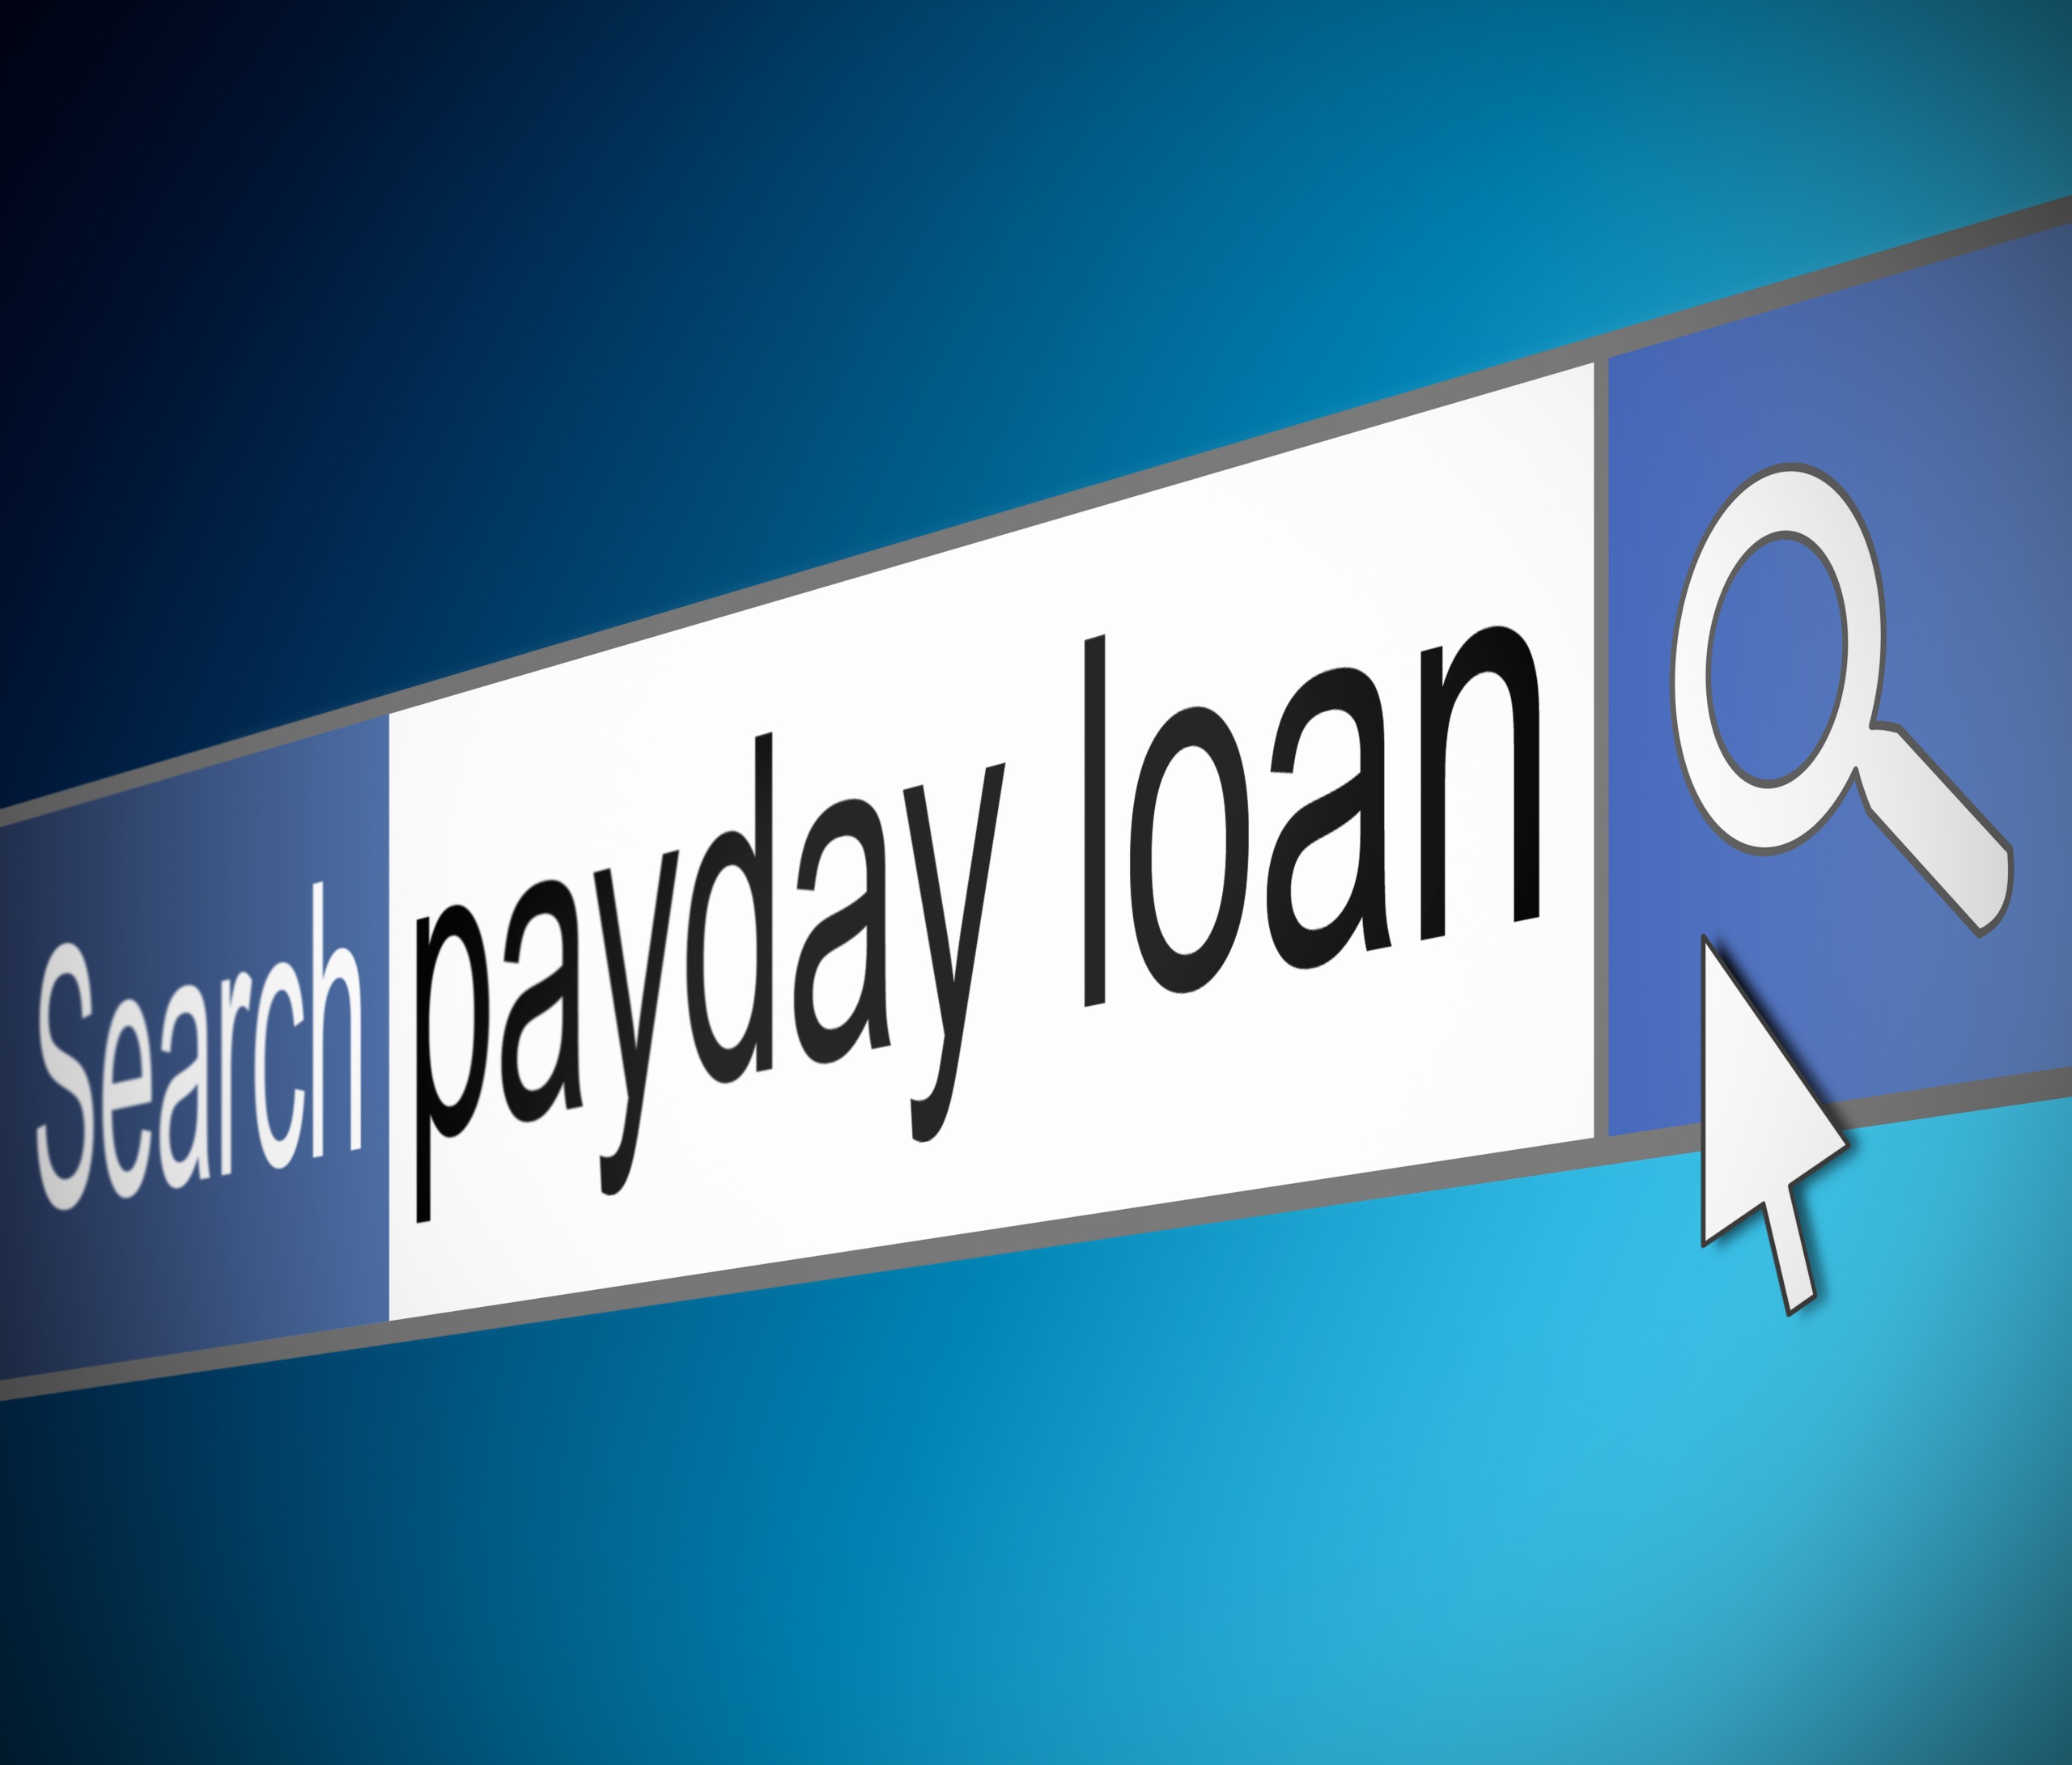 payday-loans2